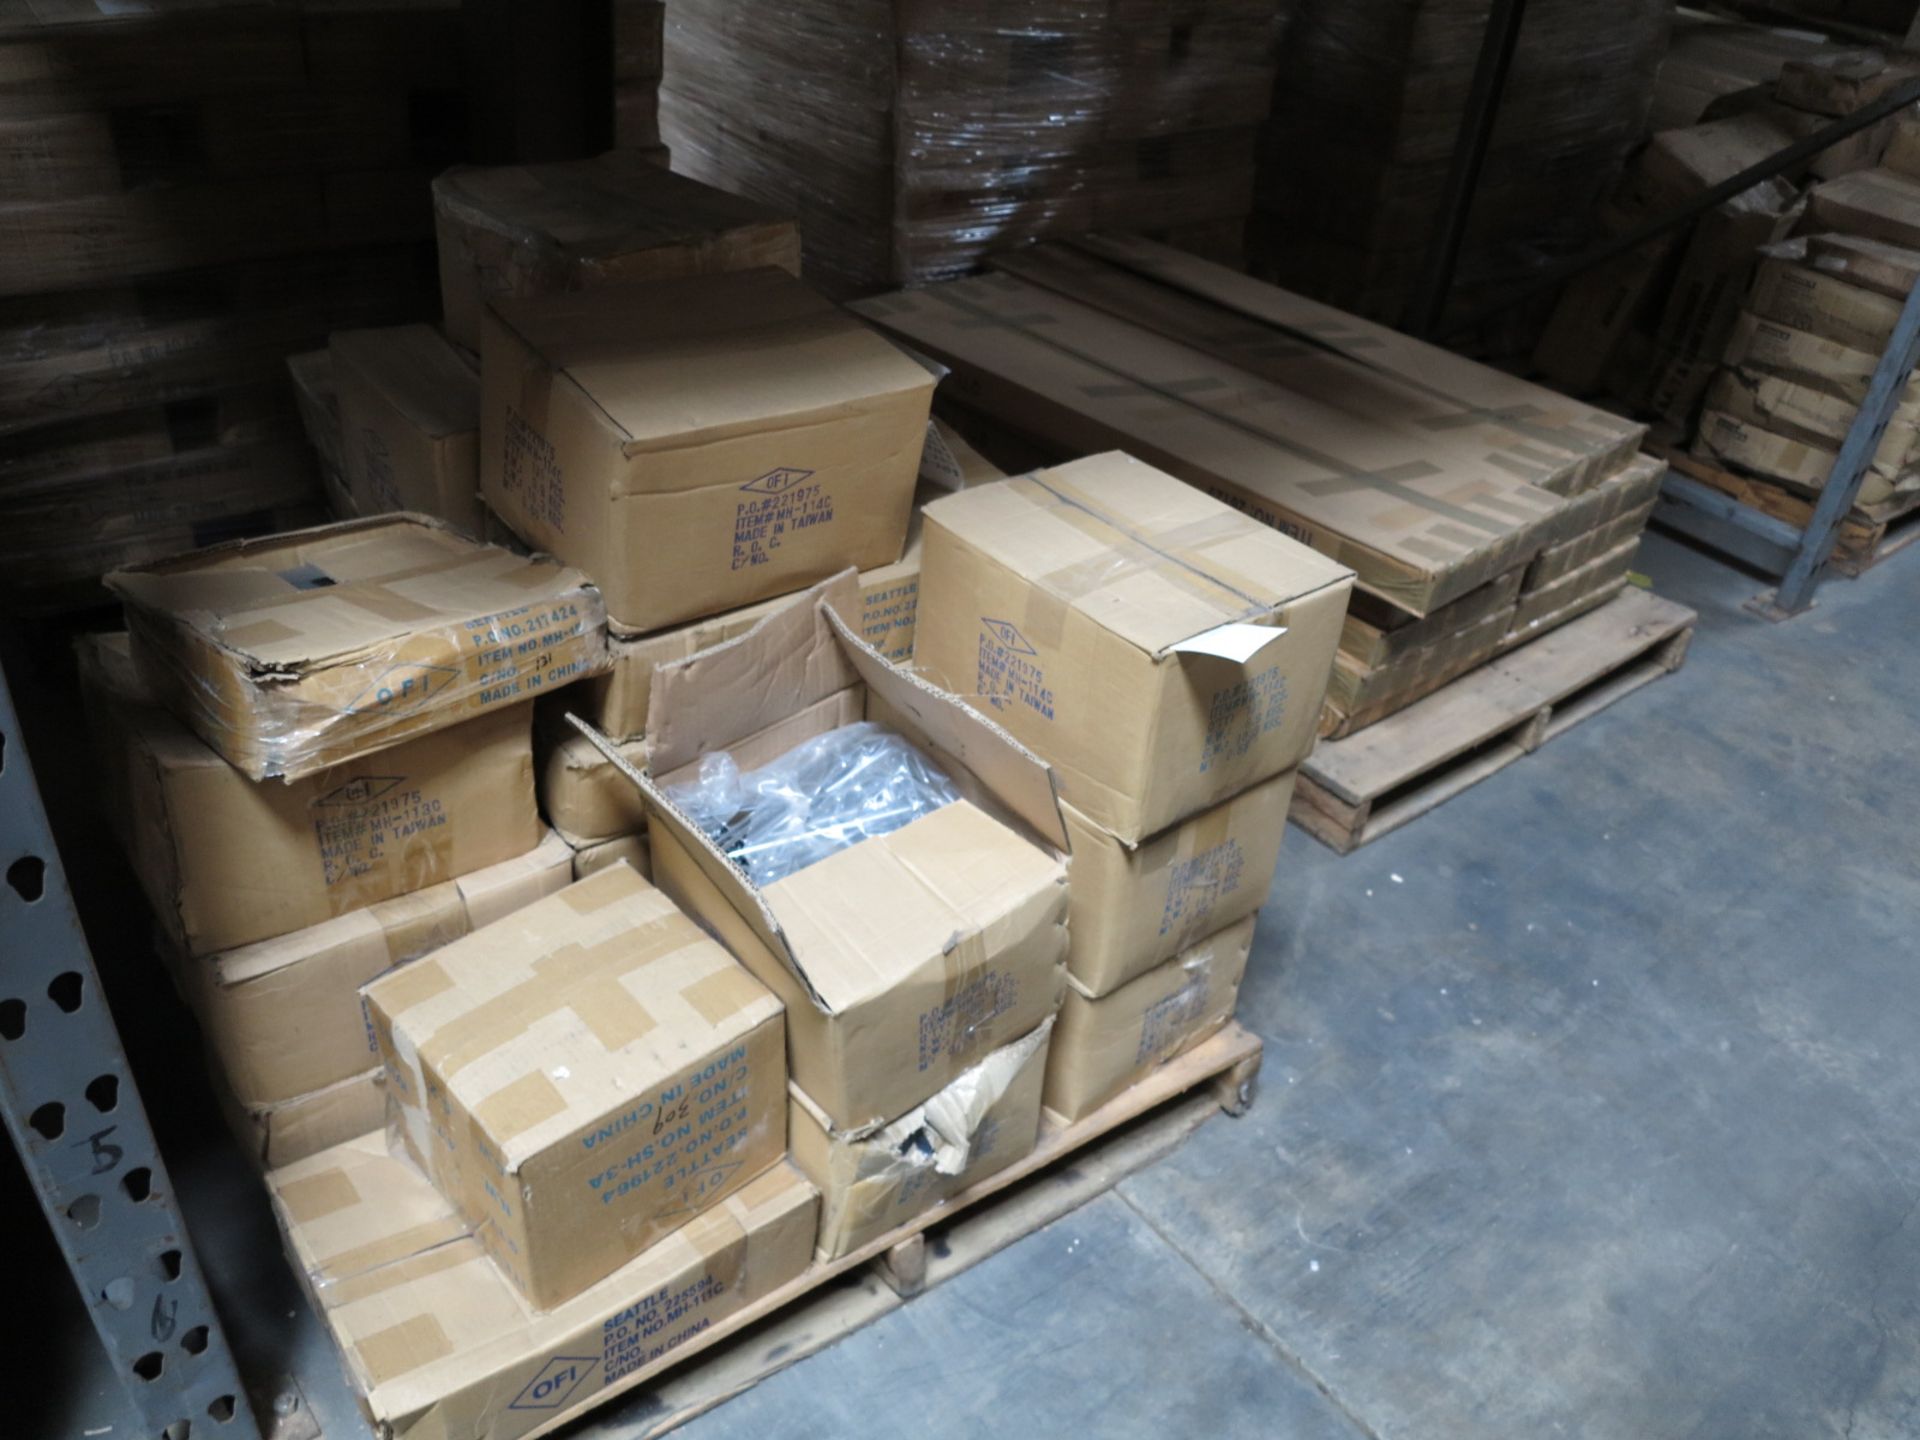 LOT - CONTENTS OF (2) SECTIONS OF PALLET RACK TO INCLUDE: ITEM # 26129, 2 WAY COSTUMER W CASTERS (